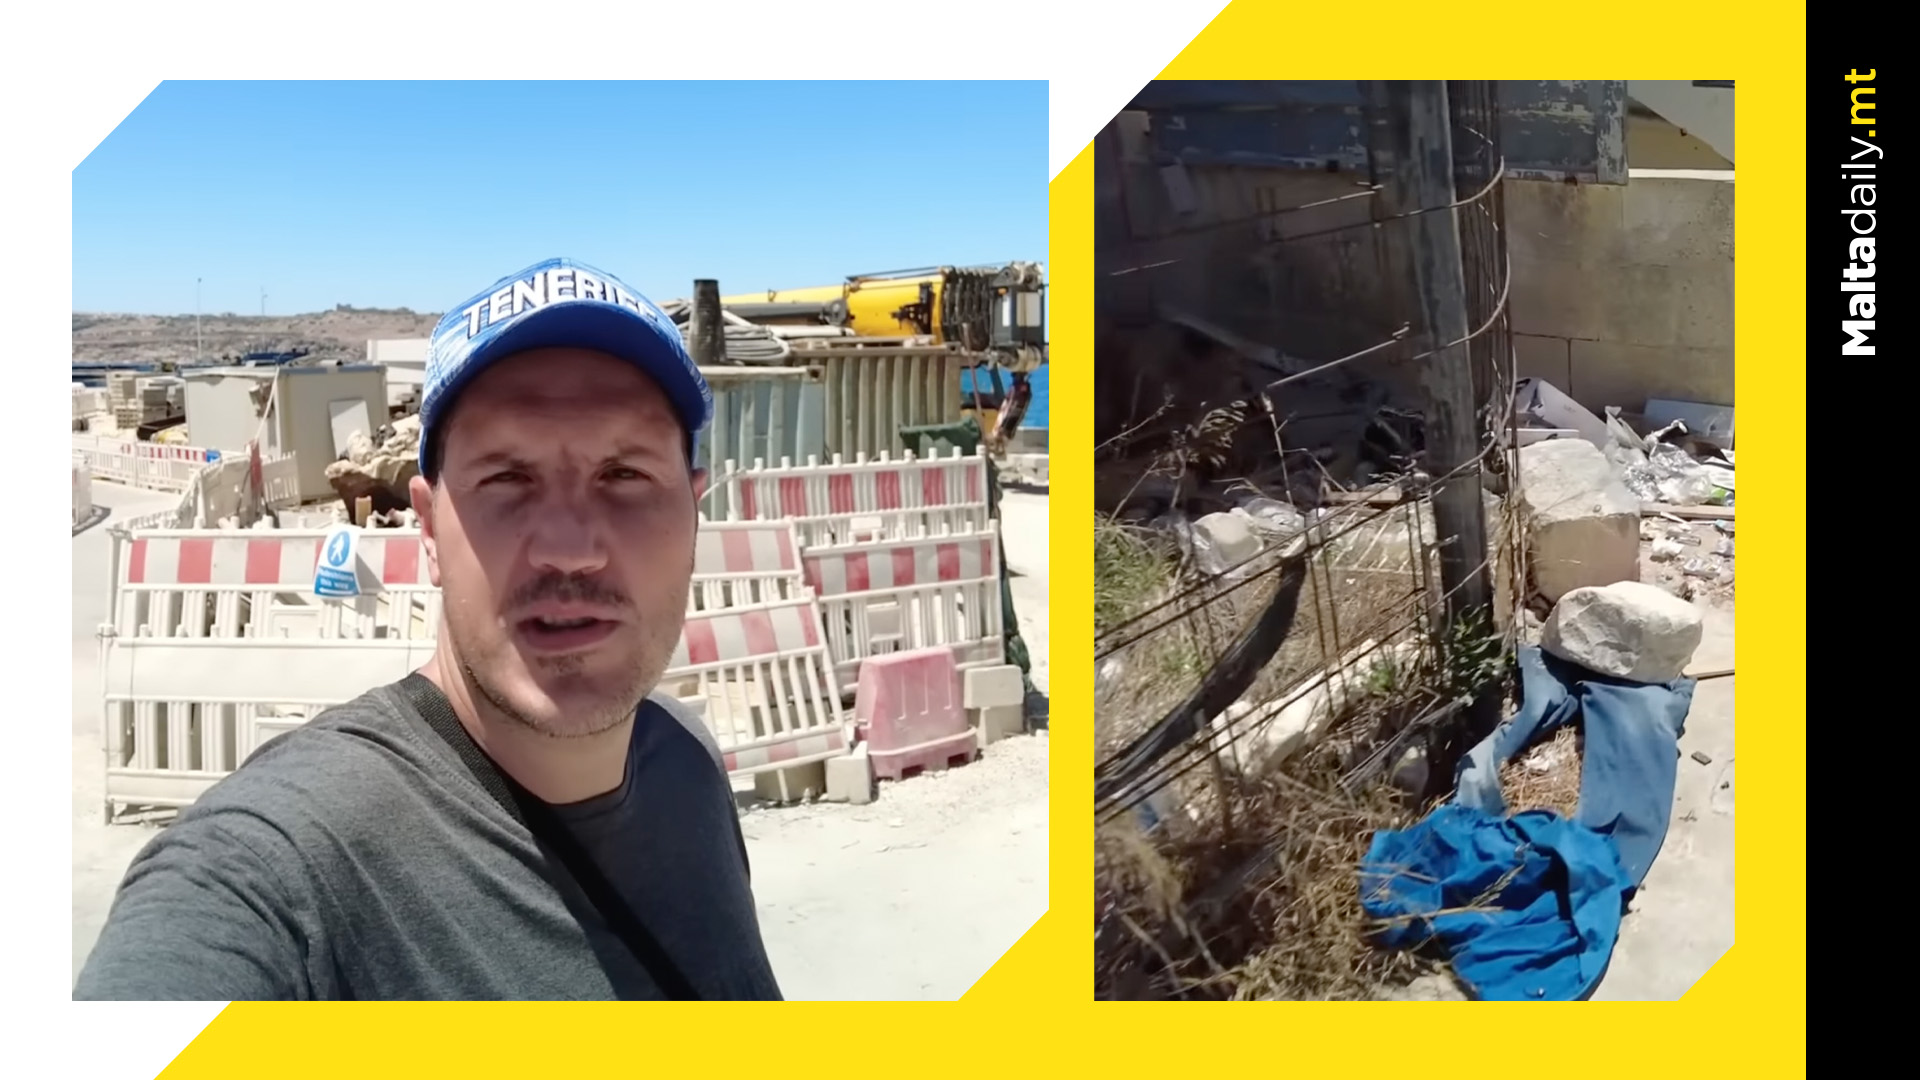 "Never-Ending Construction Site": YouTuber Dismantles Malta in Review Video